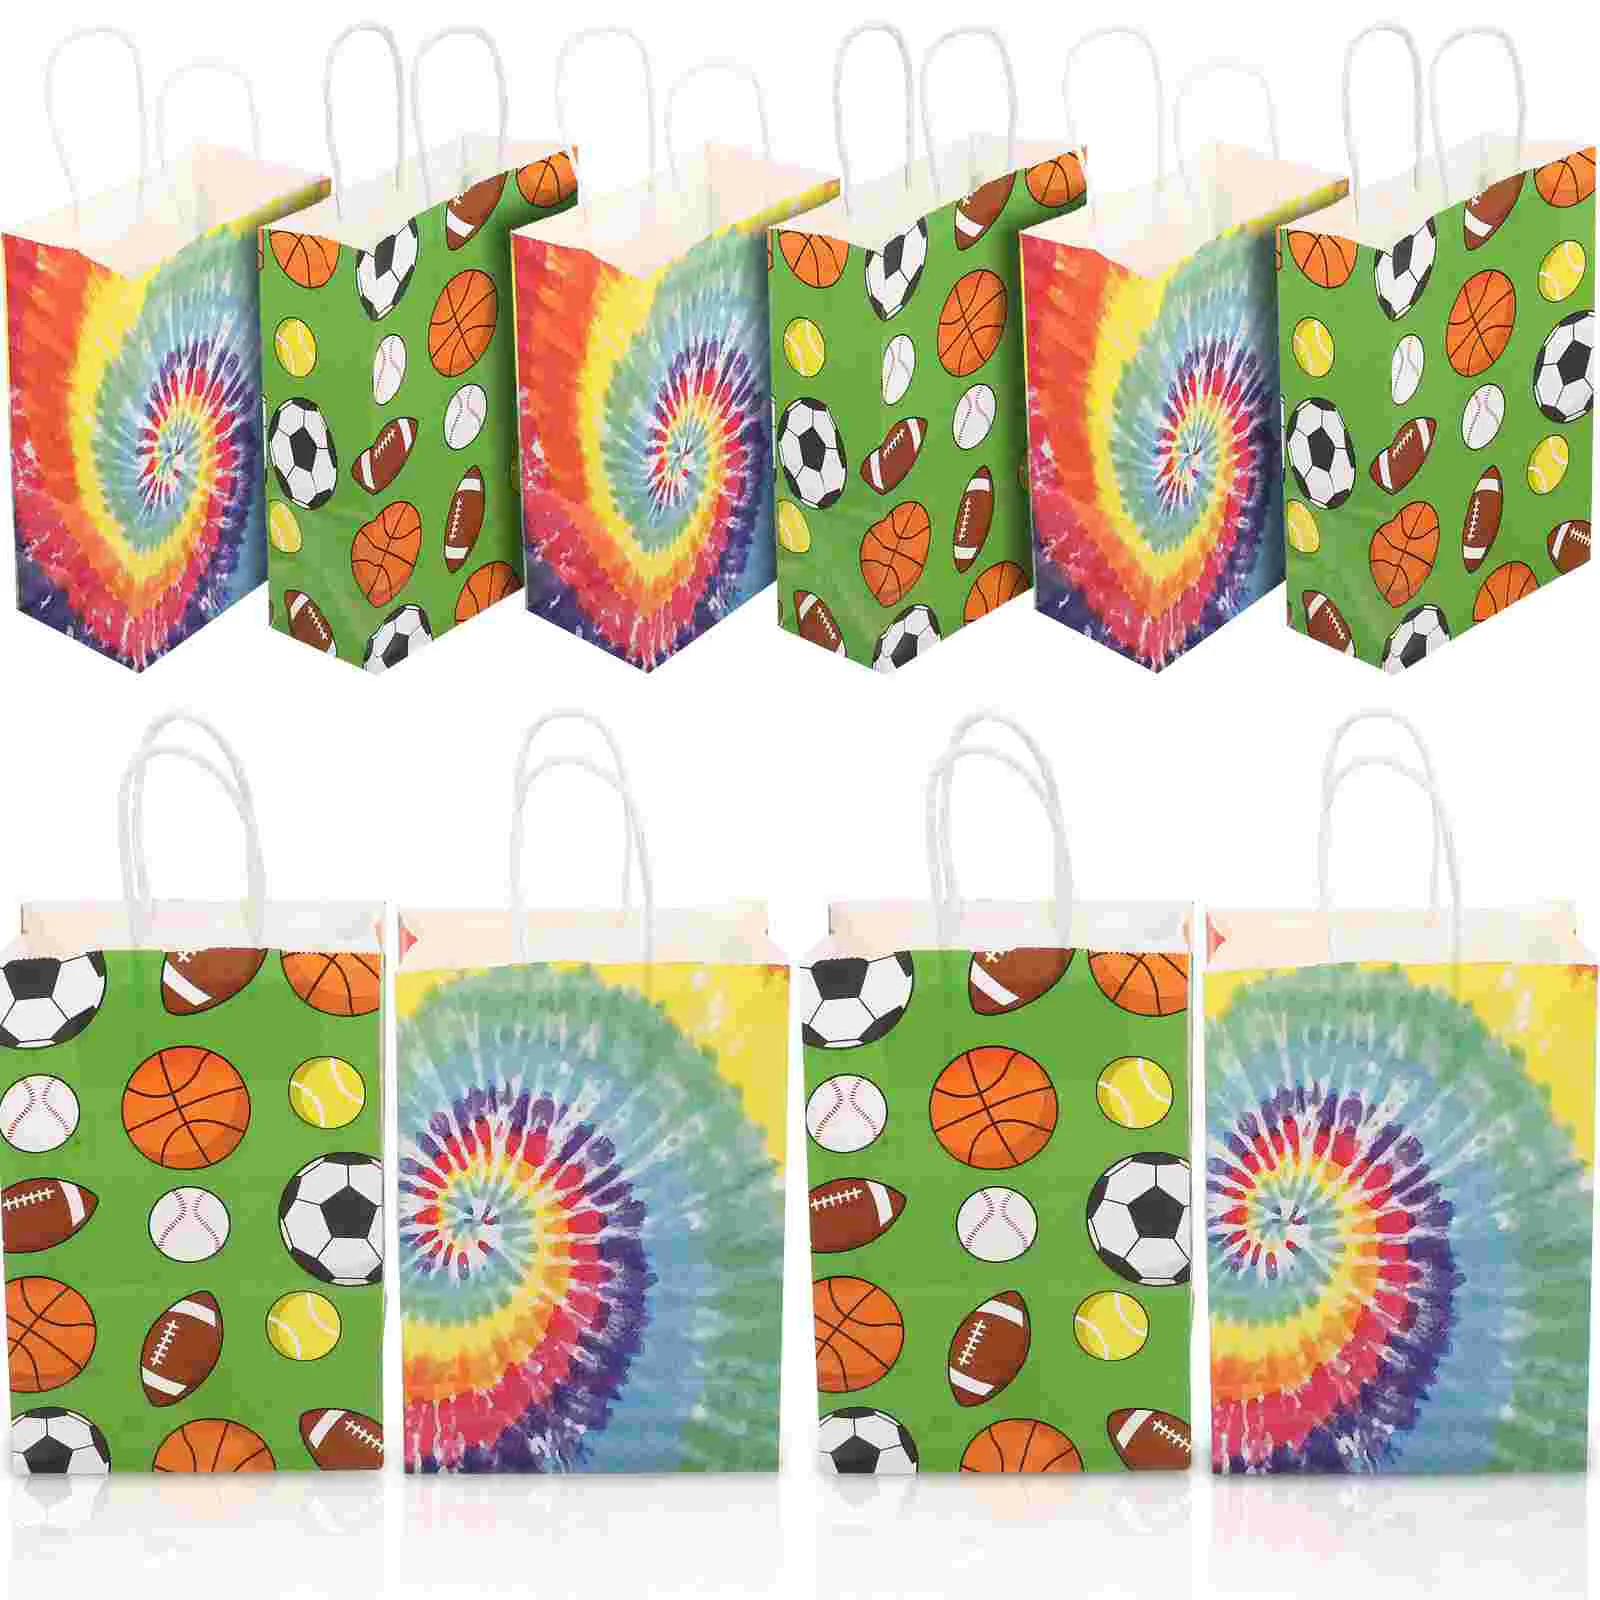 

Bags Soccer Football Gift Party Goodie Themed Treat Bag Birthday Pouches Present Candy Paper Snack Favors Favor Print